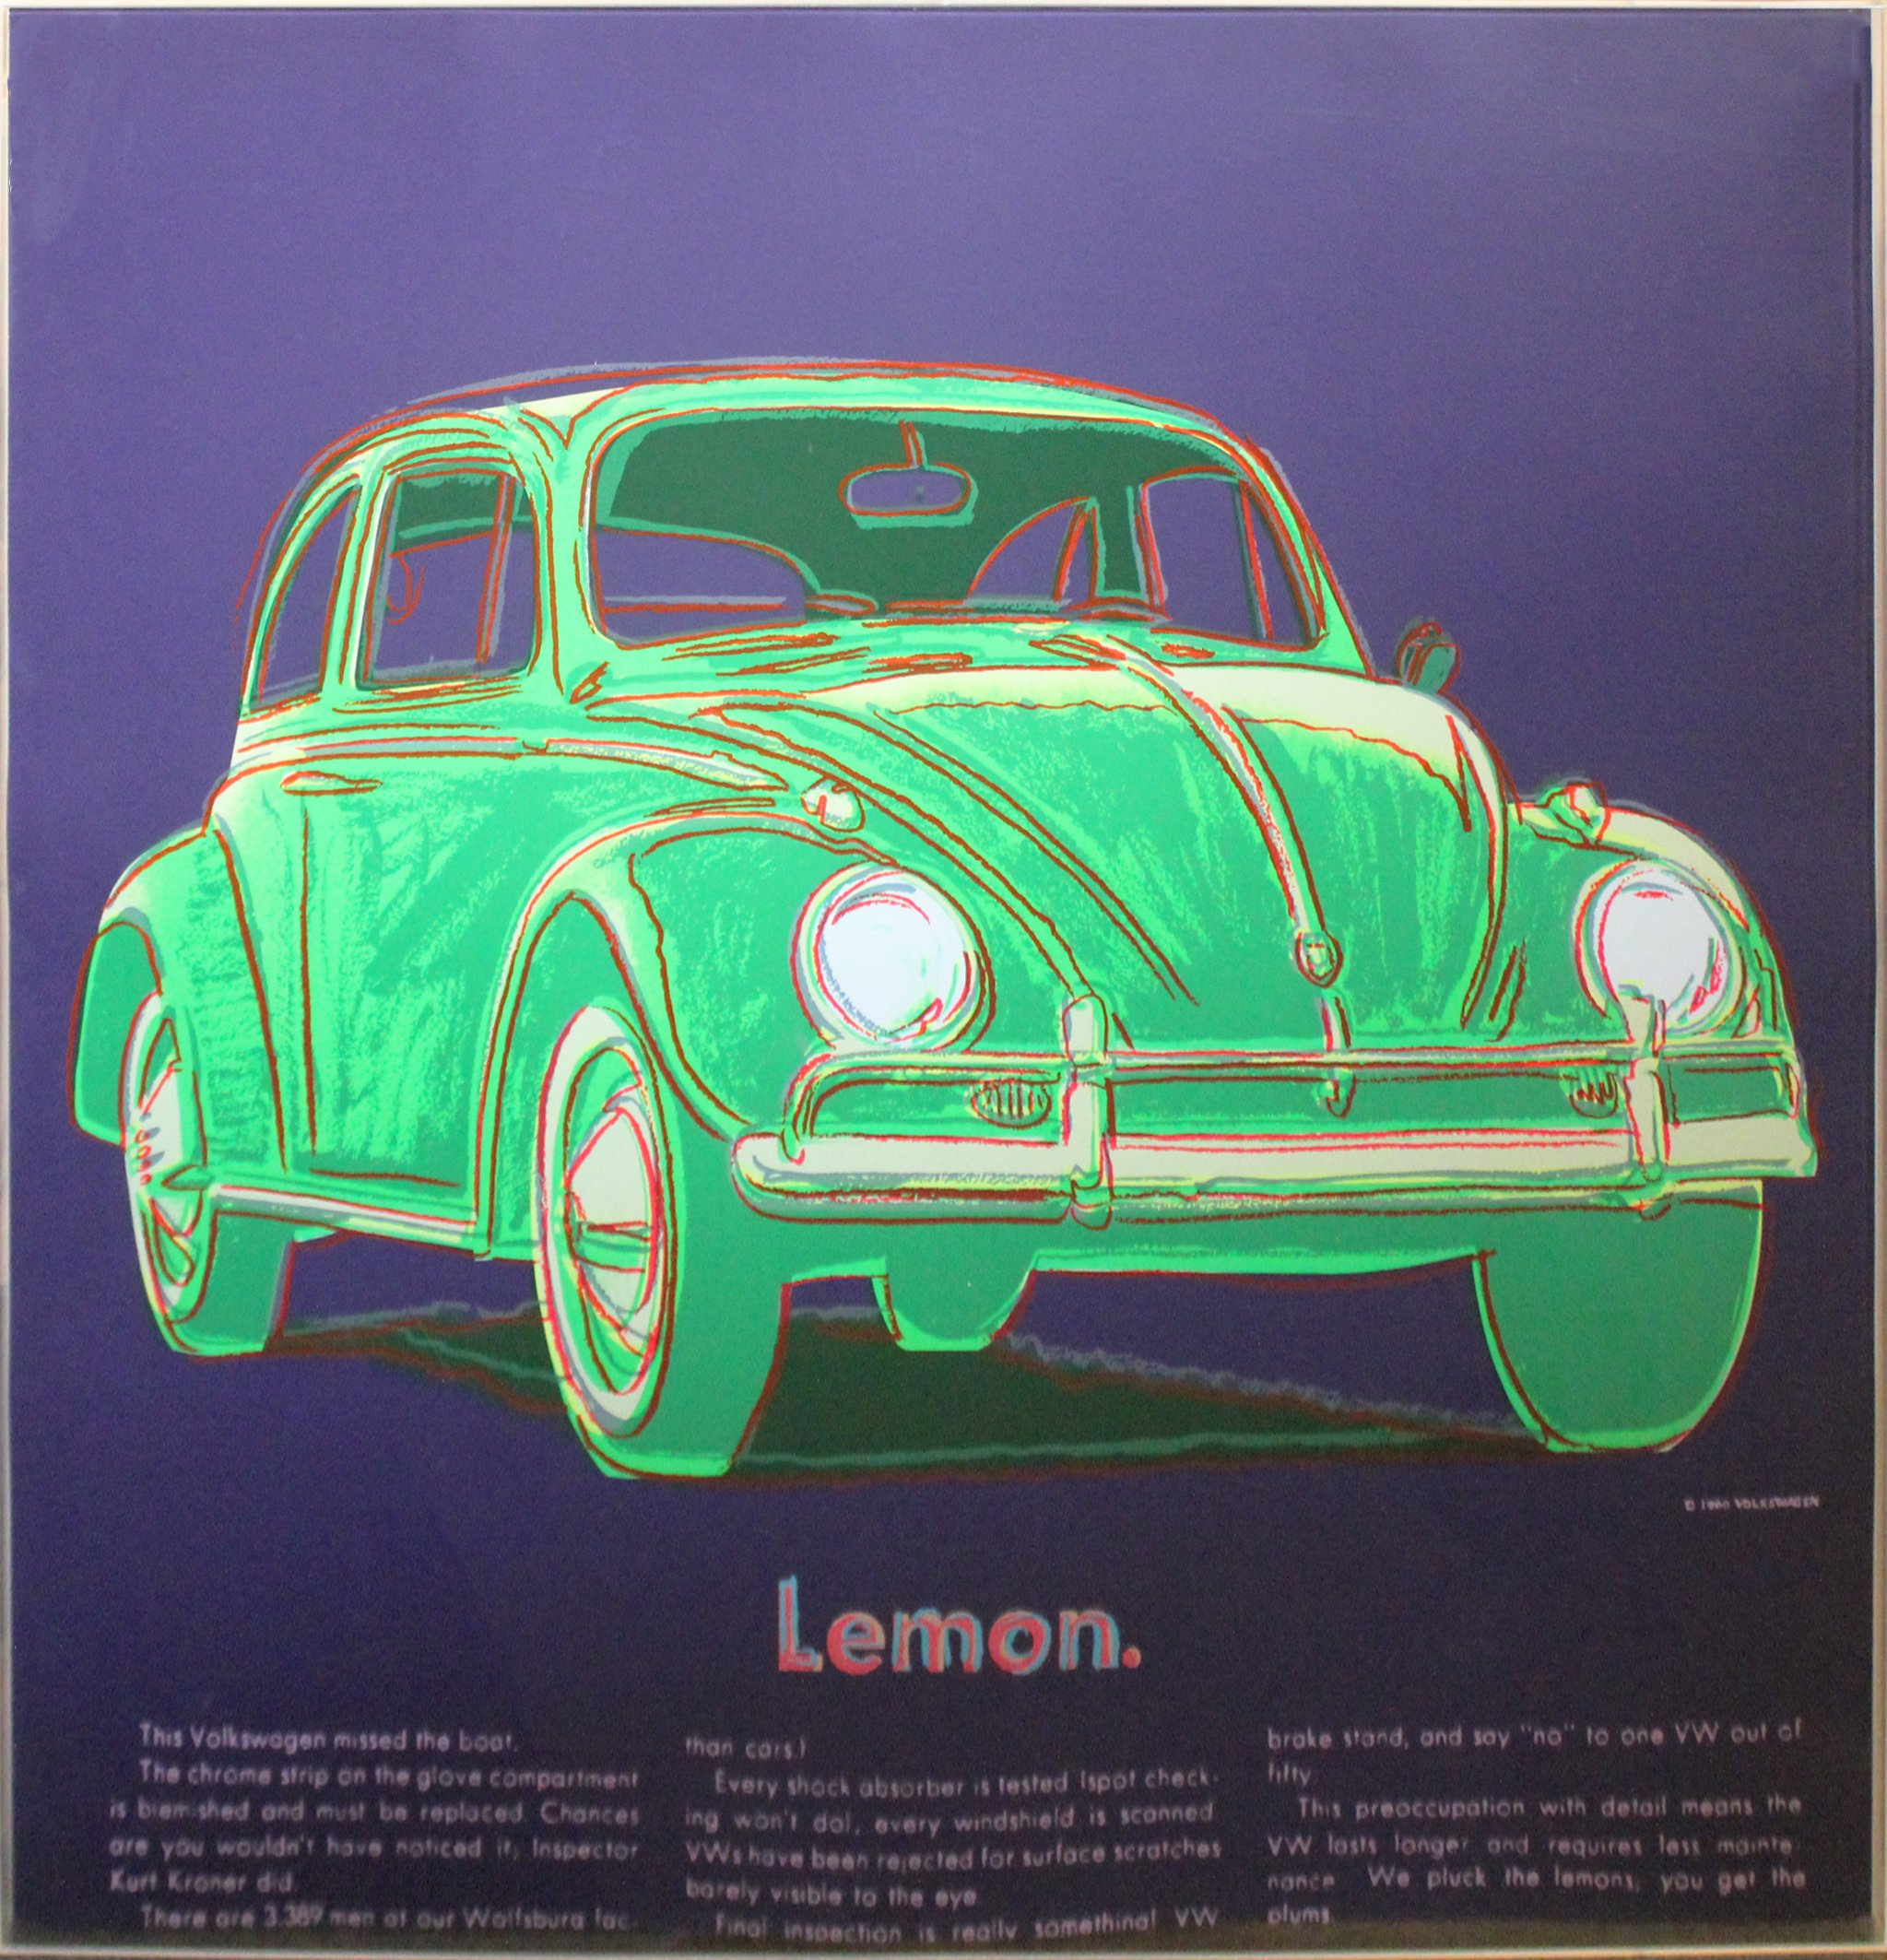  Andy Warhol  (1928-1987)   Volkswagen from ADS , 1985  Screenprint  From the numbered edition of 190  38 x 38 inches  Estimate: $60,000/$70,000  Sold for: $70,125 including premium 